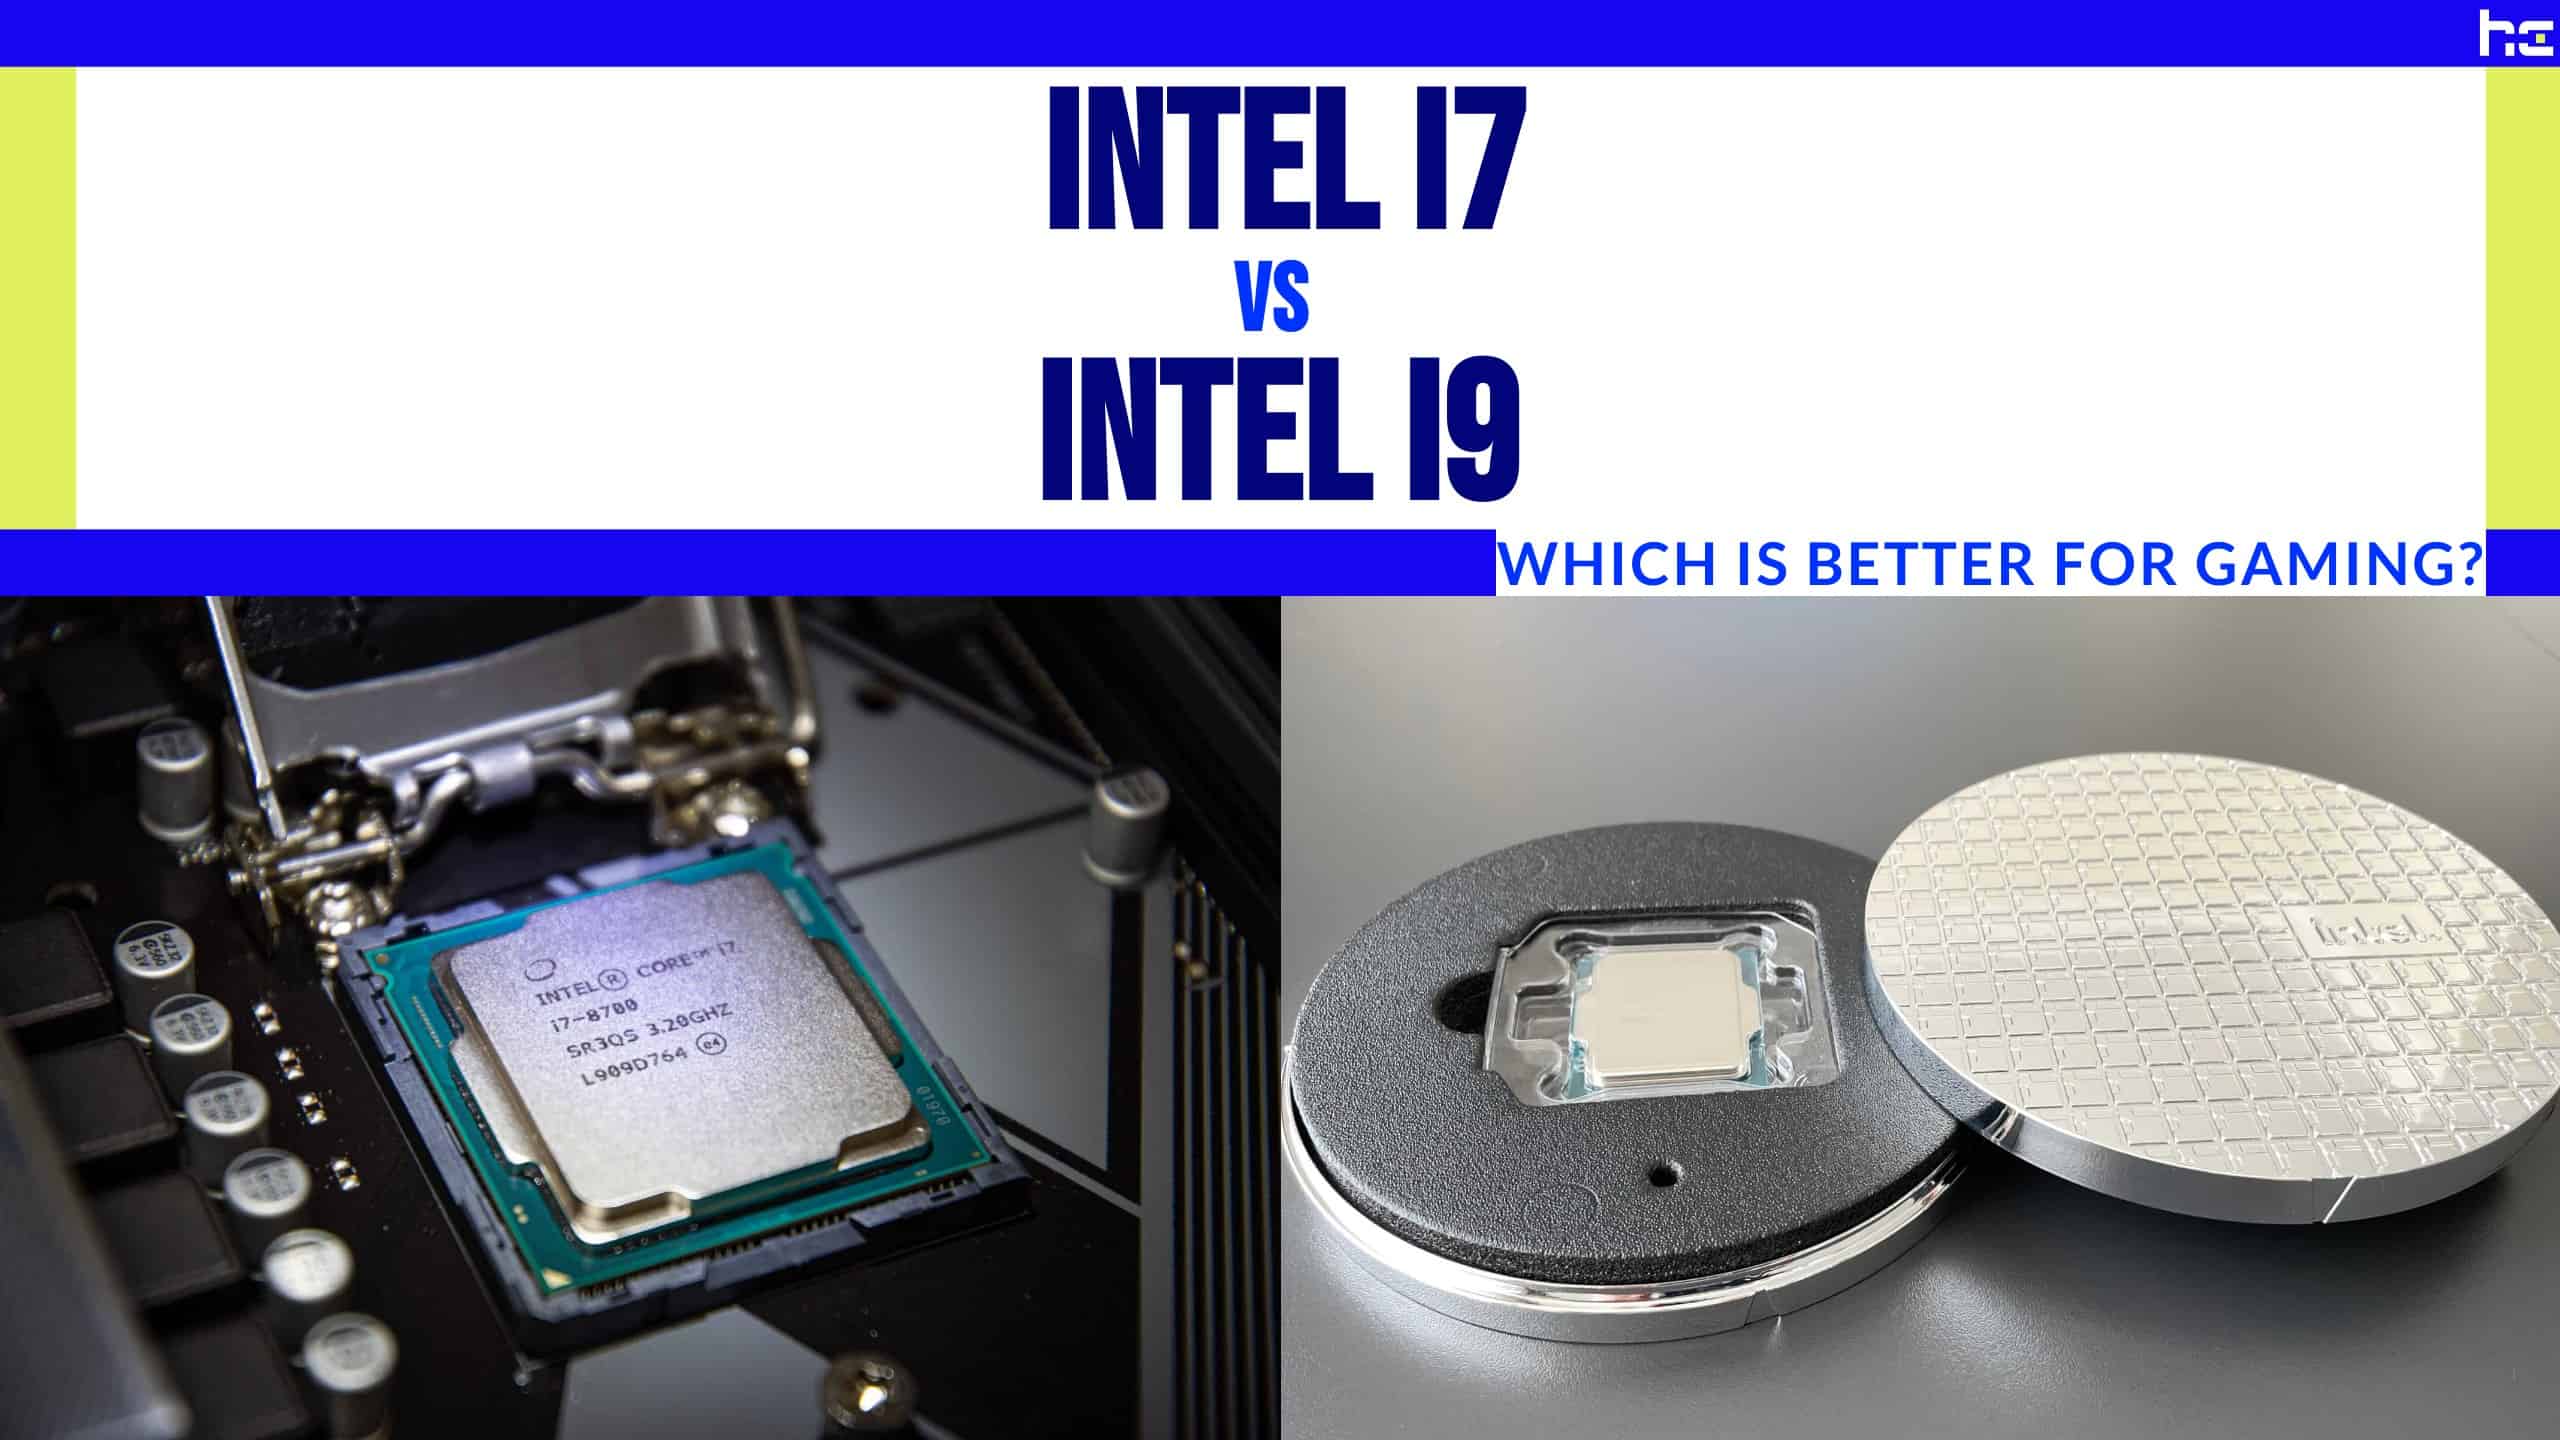 Gaming Performance: 1080p - The Intel Core i3-13100F Review: Finding Value  in Intel's Cheapest Core Chip